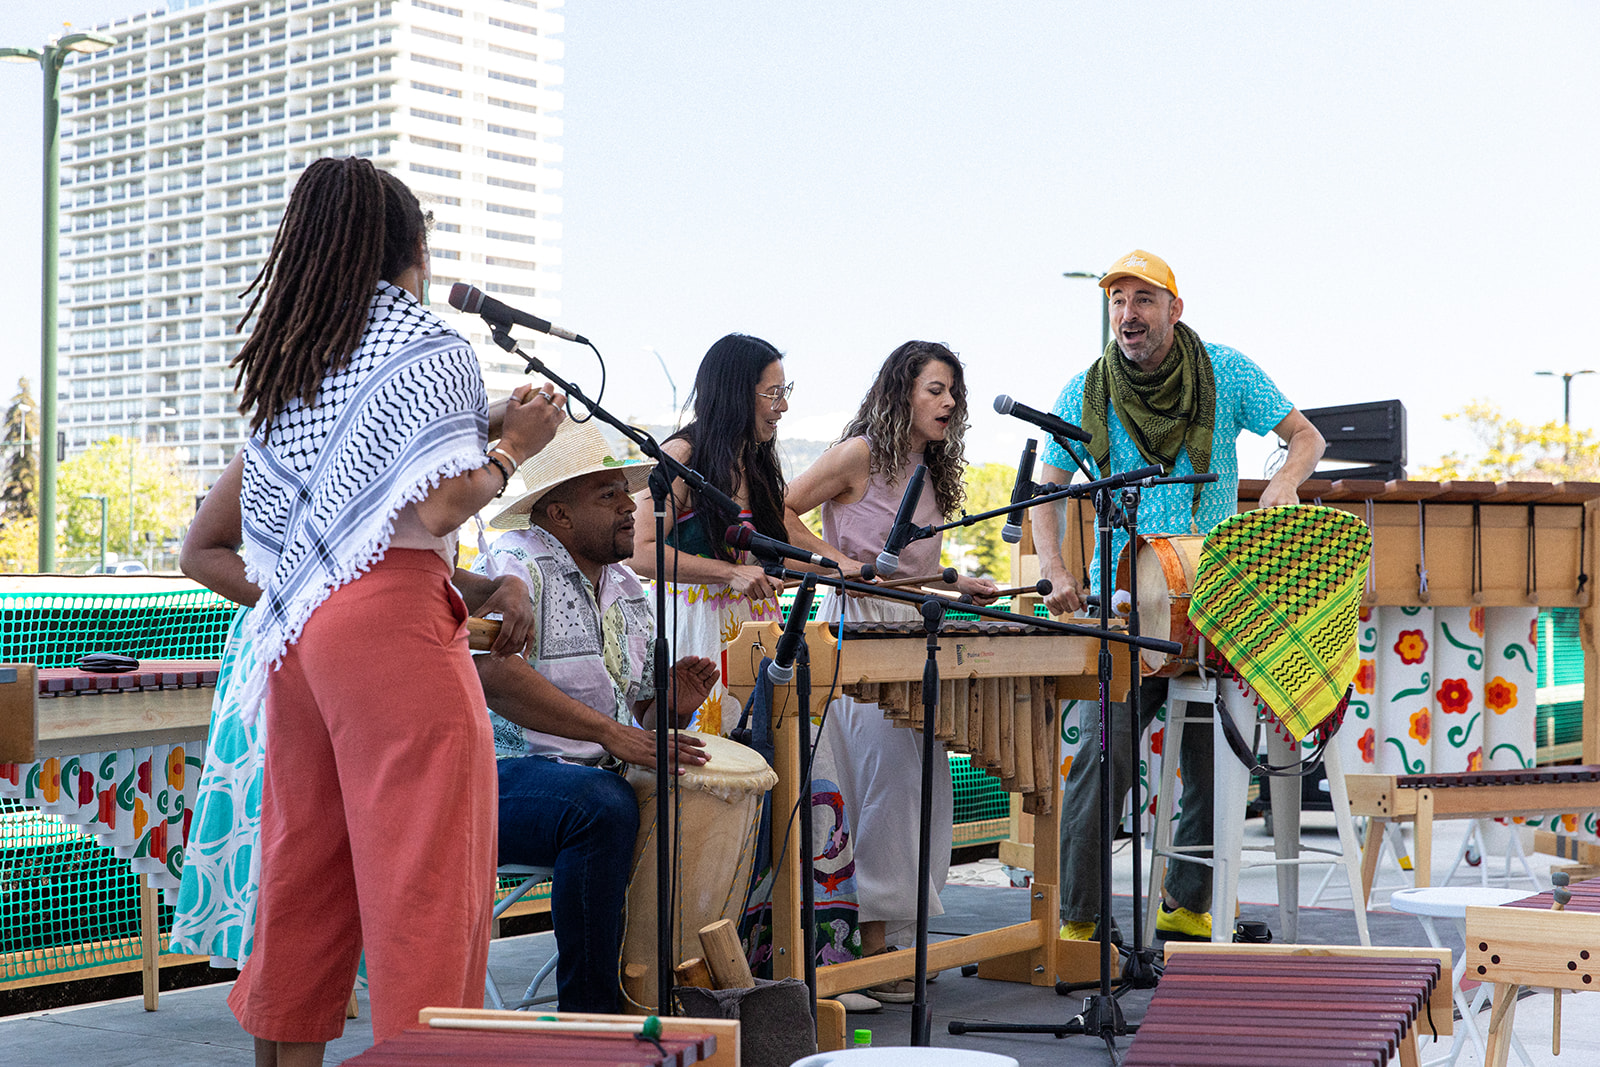 A band plays percussive instruments on an outdoor deck